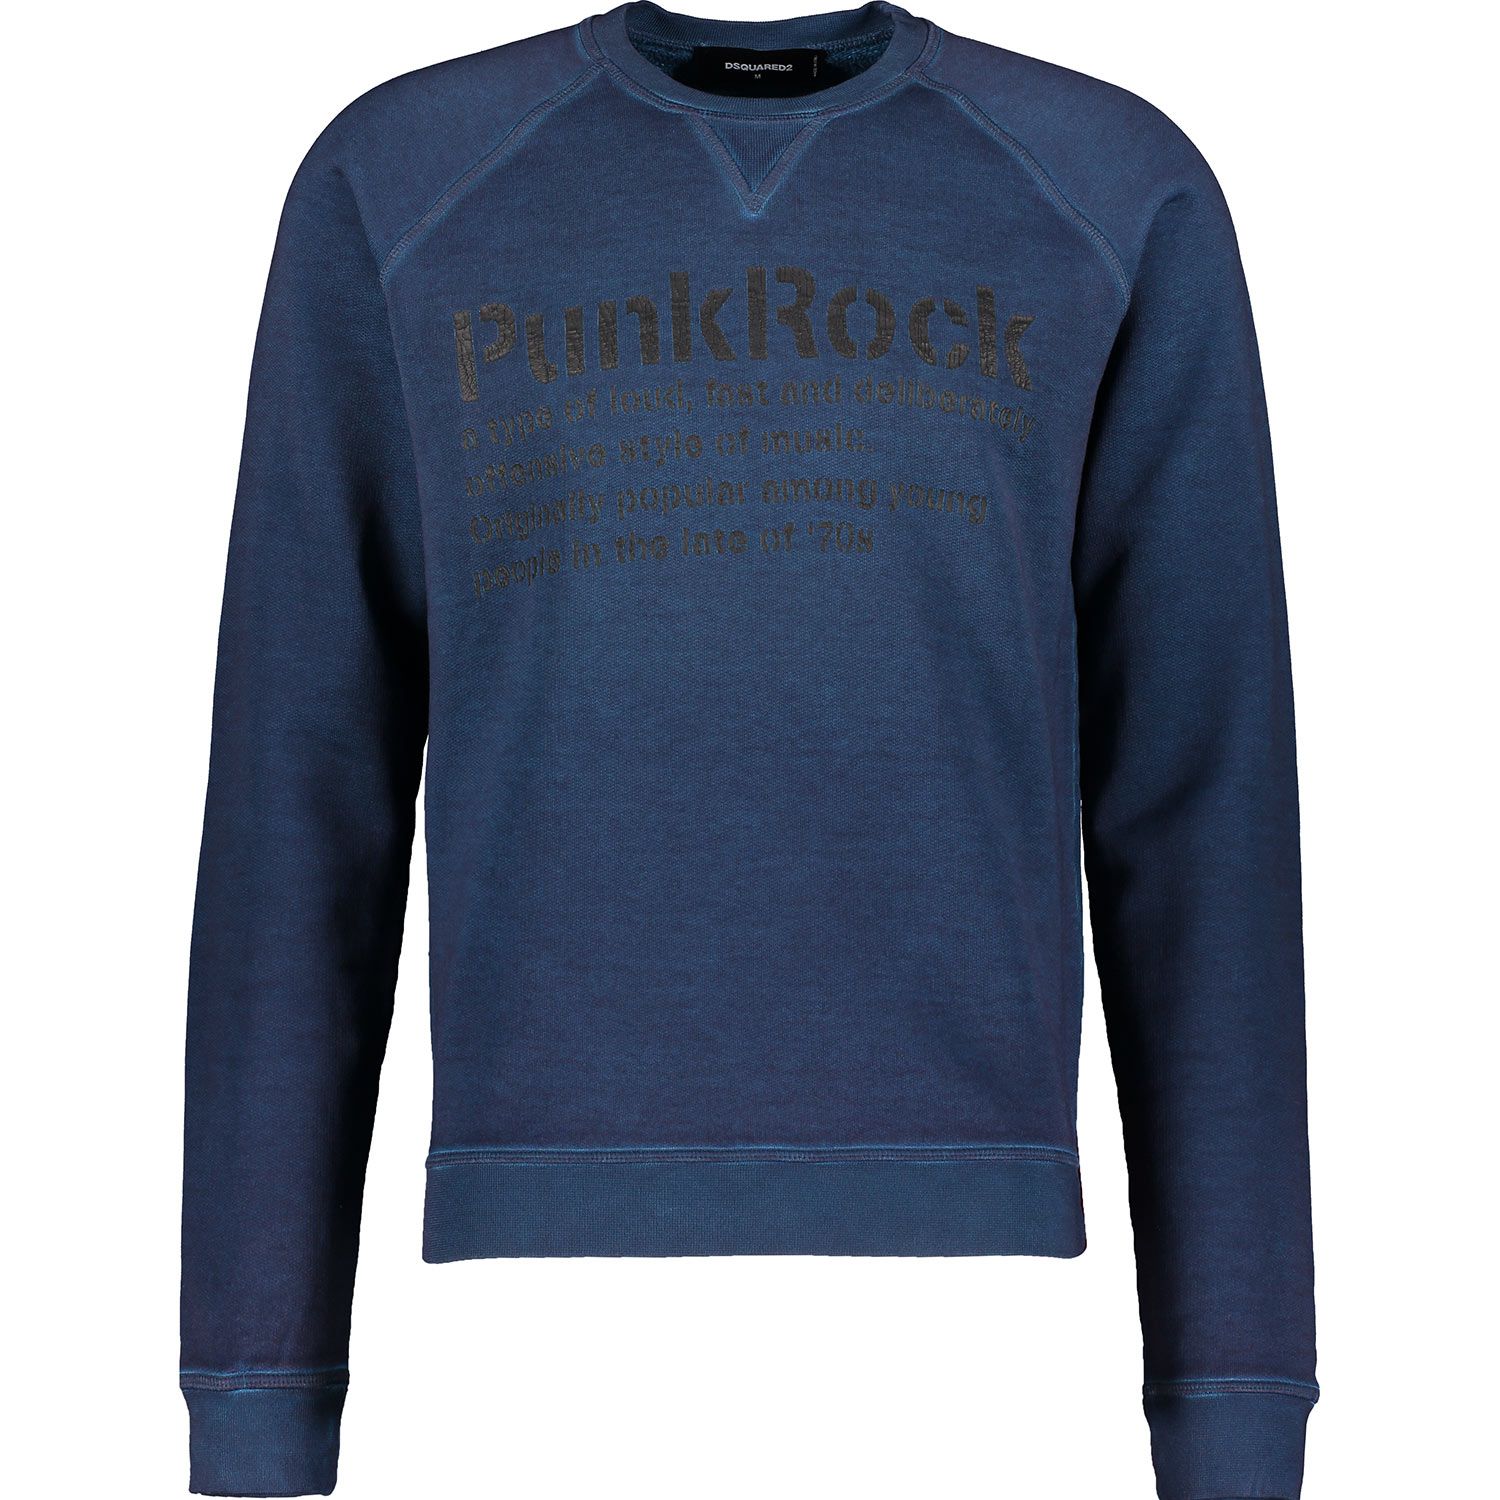 DSquared2 S74GU0140 505 Jumper. DSquared2 Blue Jumper. 100% Cotton. Made in Italy. Graphic on Front of Sweater.